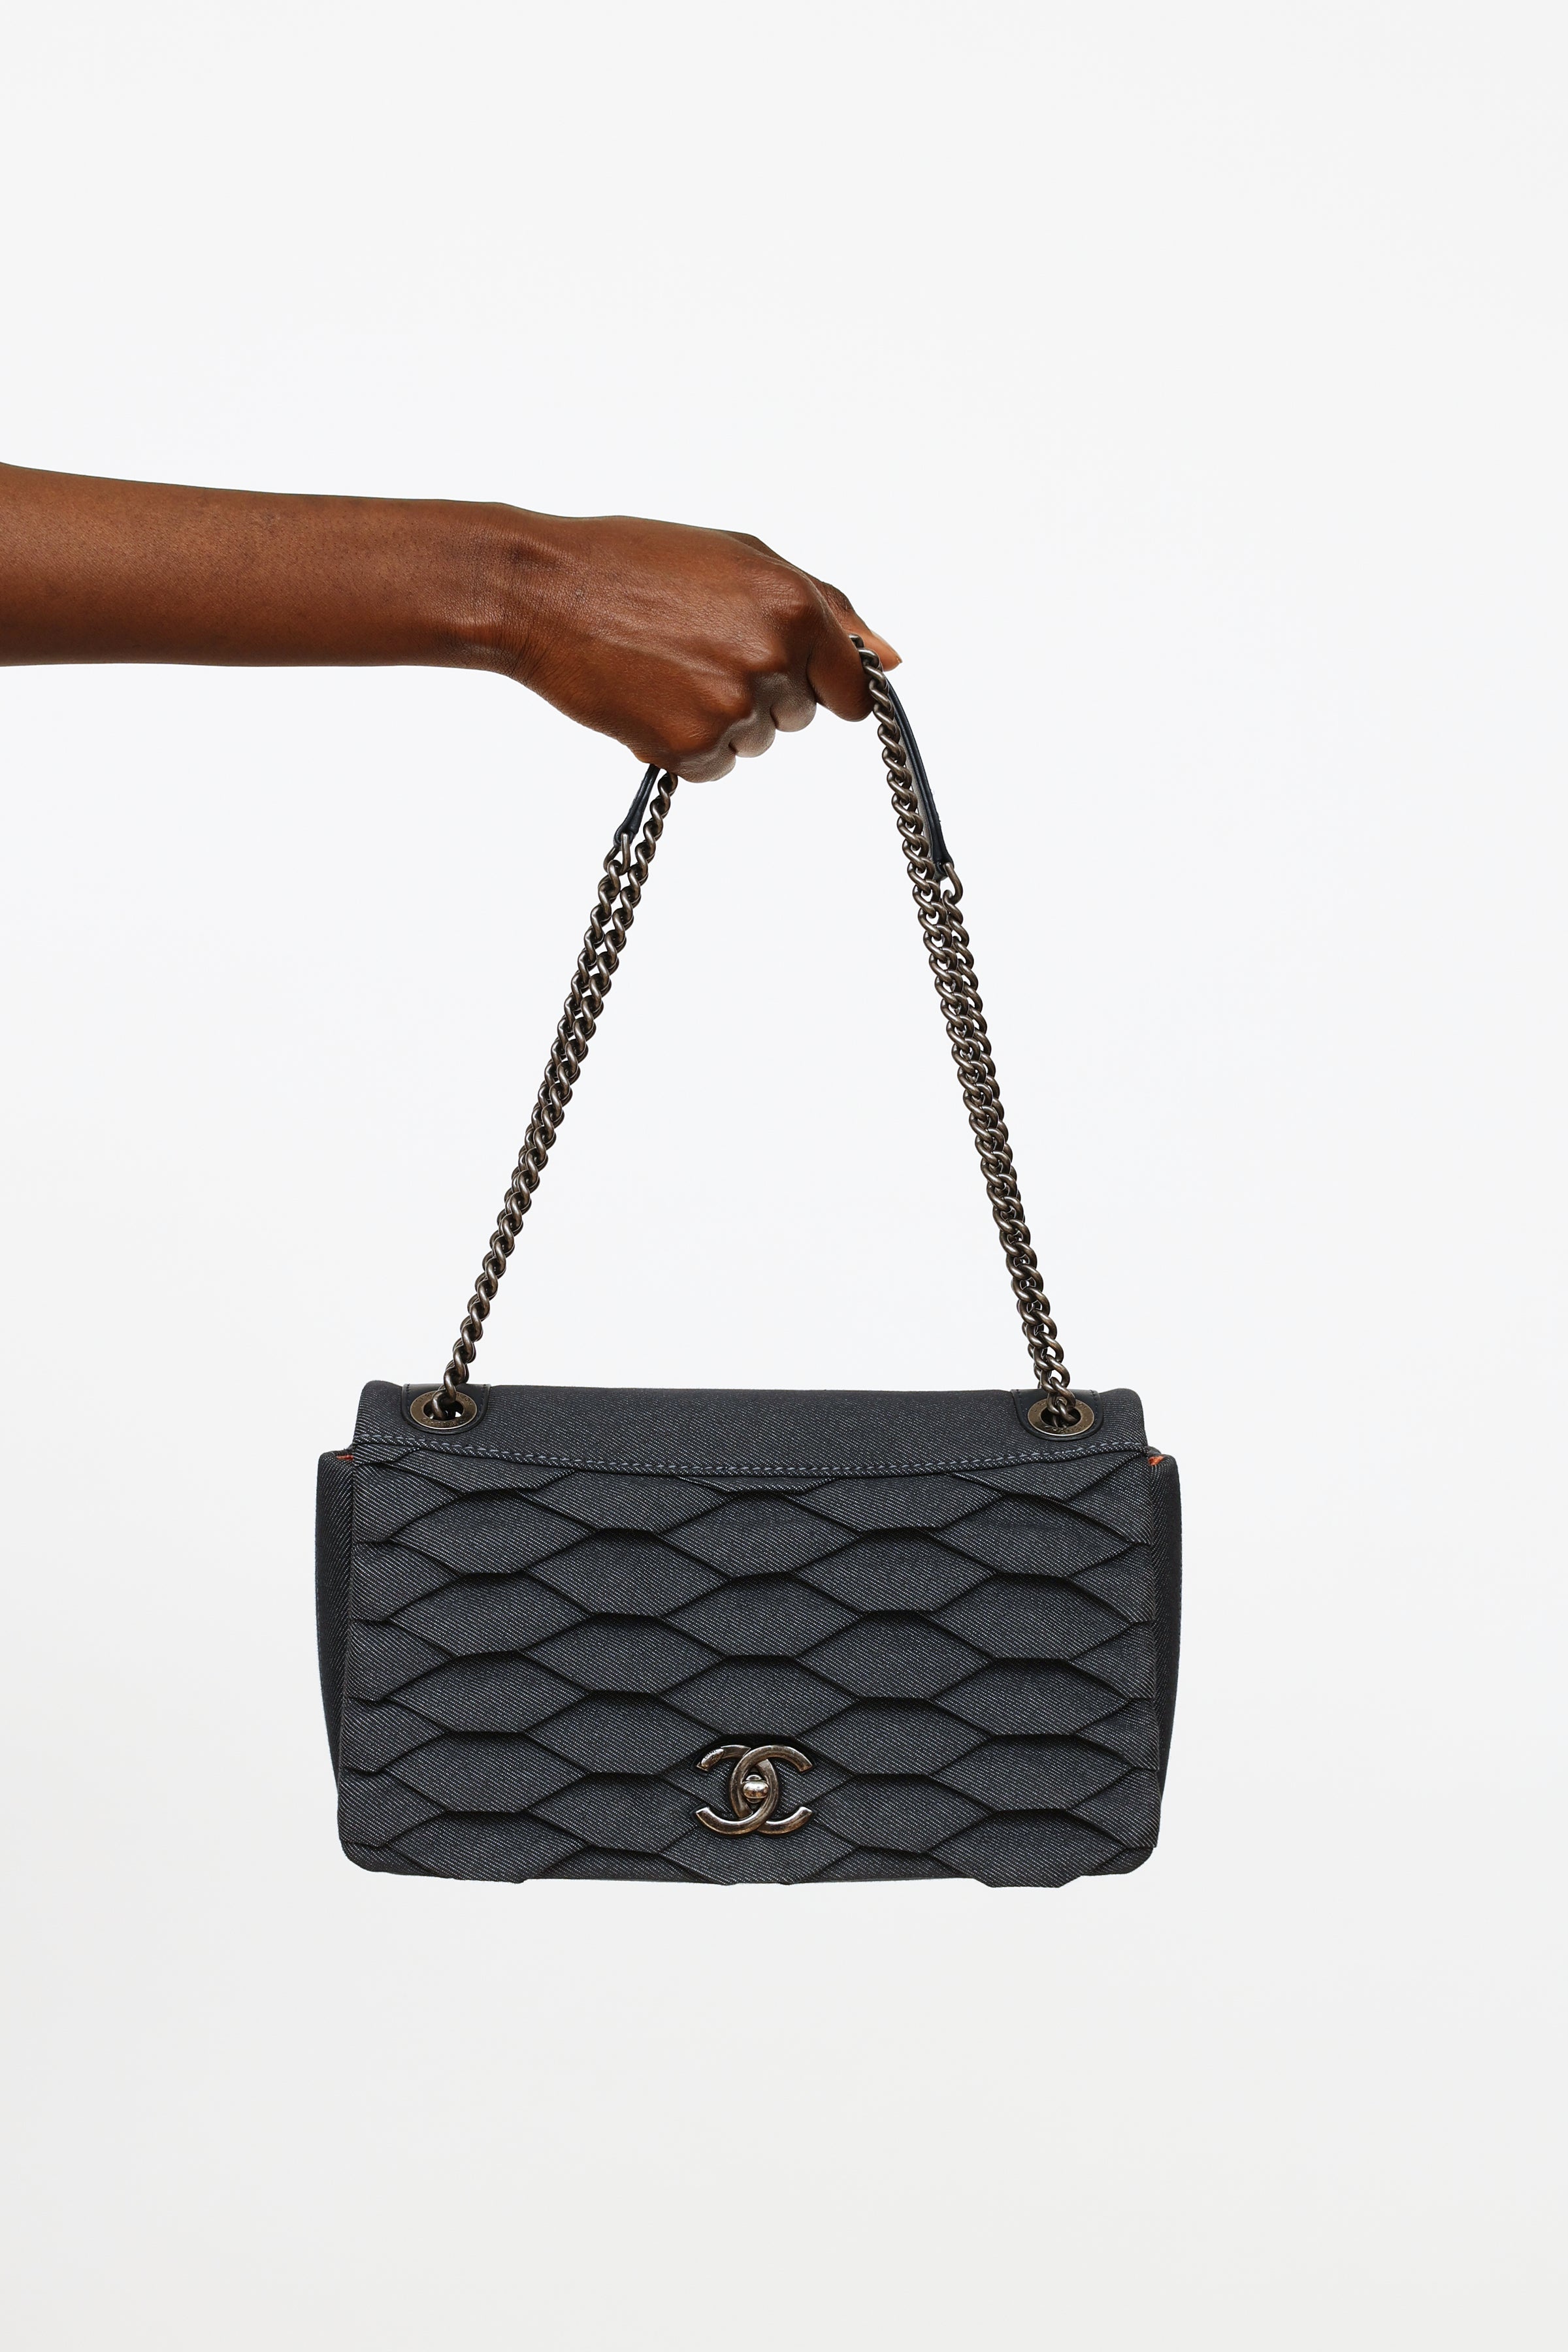 Chanel // 2016 Denim Pleated Chain Flap Bag – VSP Consignment